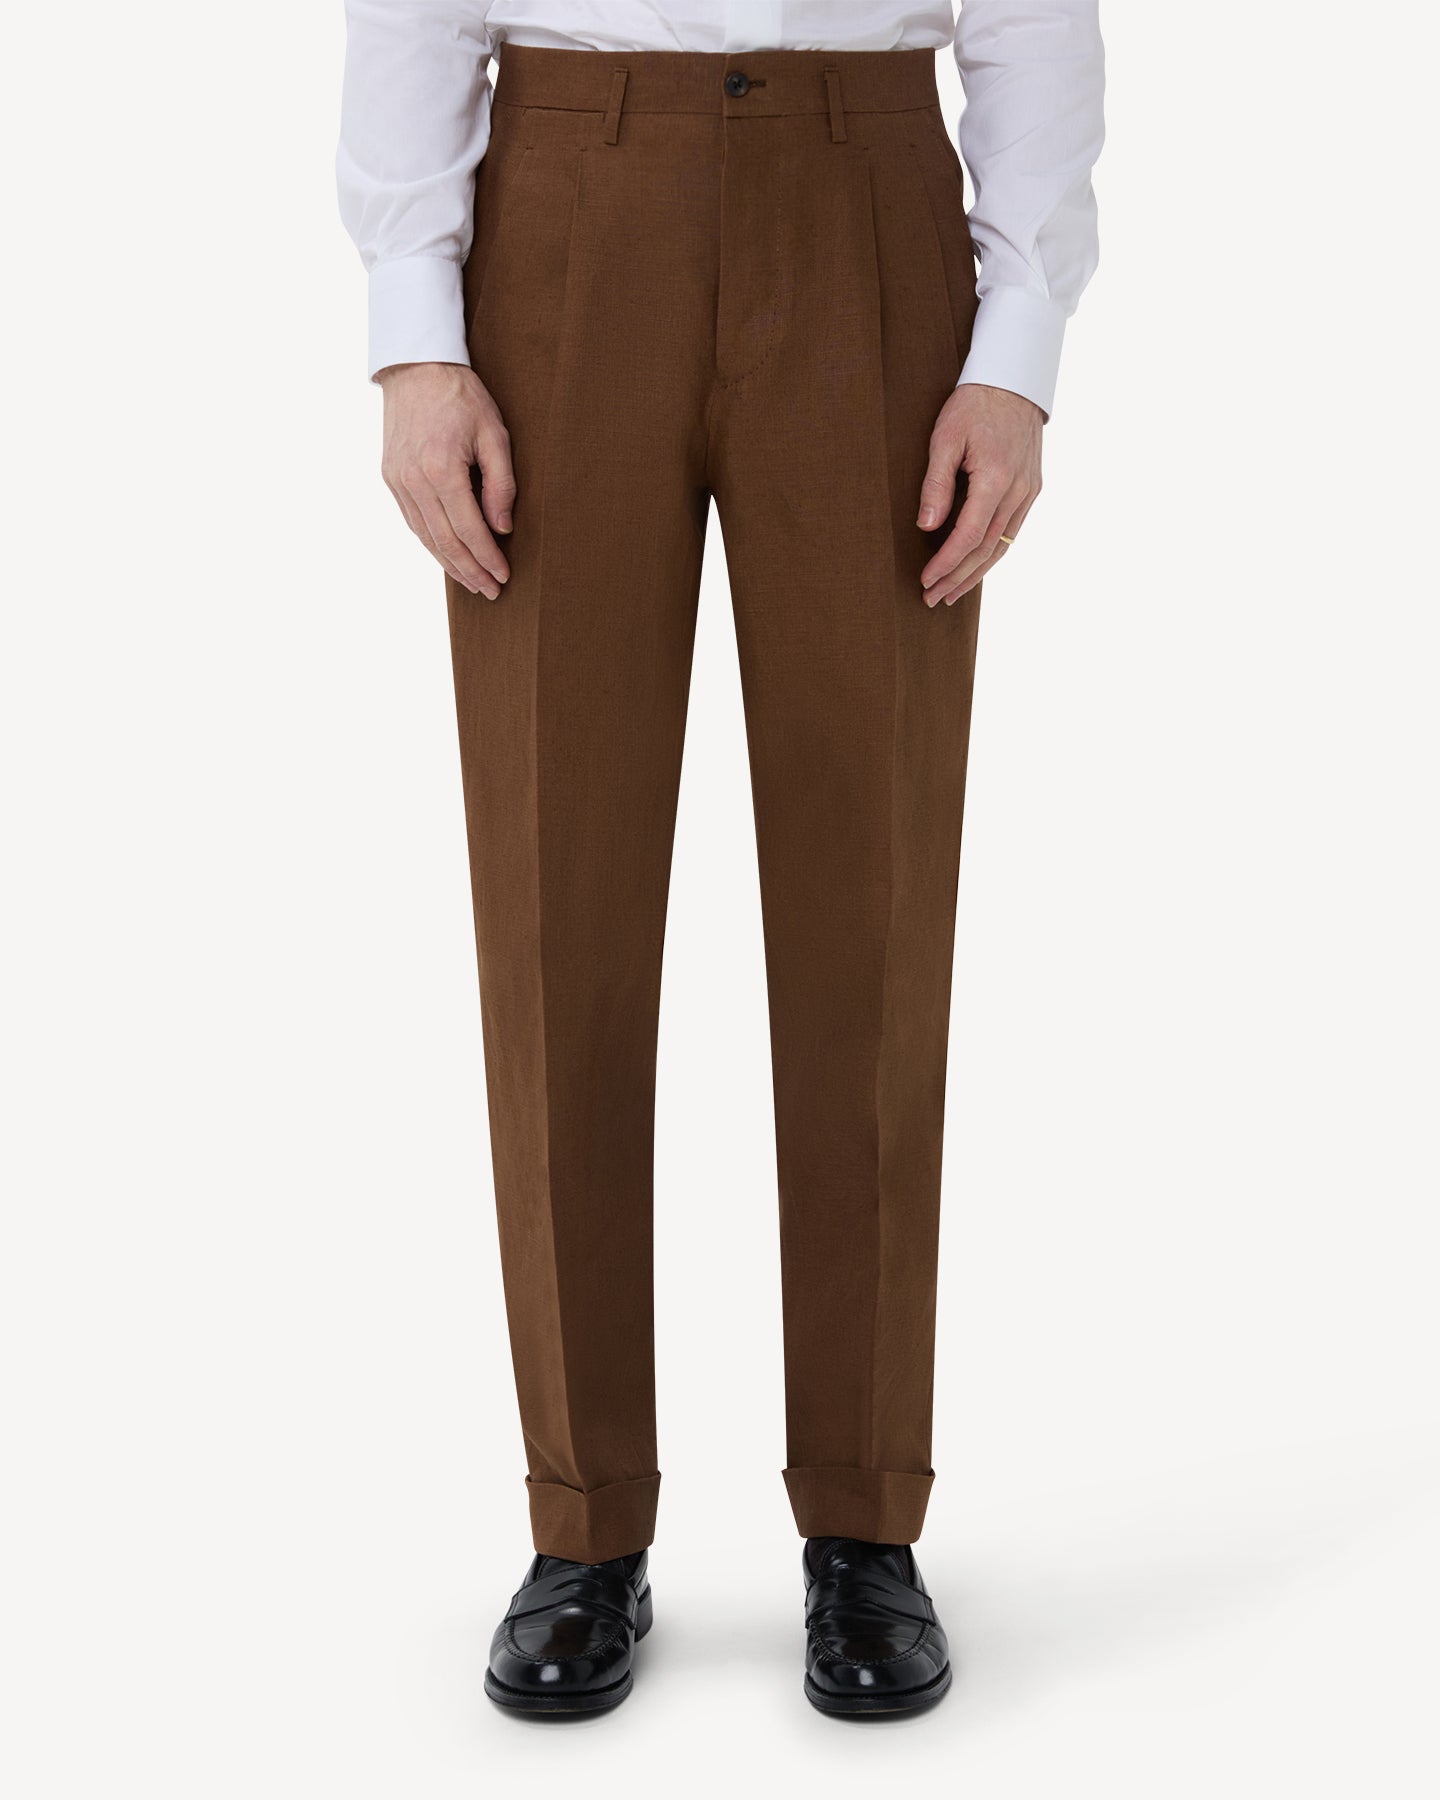 The front of dark tan linen trousers with double pleats and belt loops